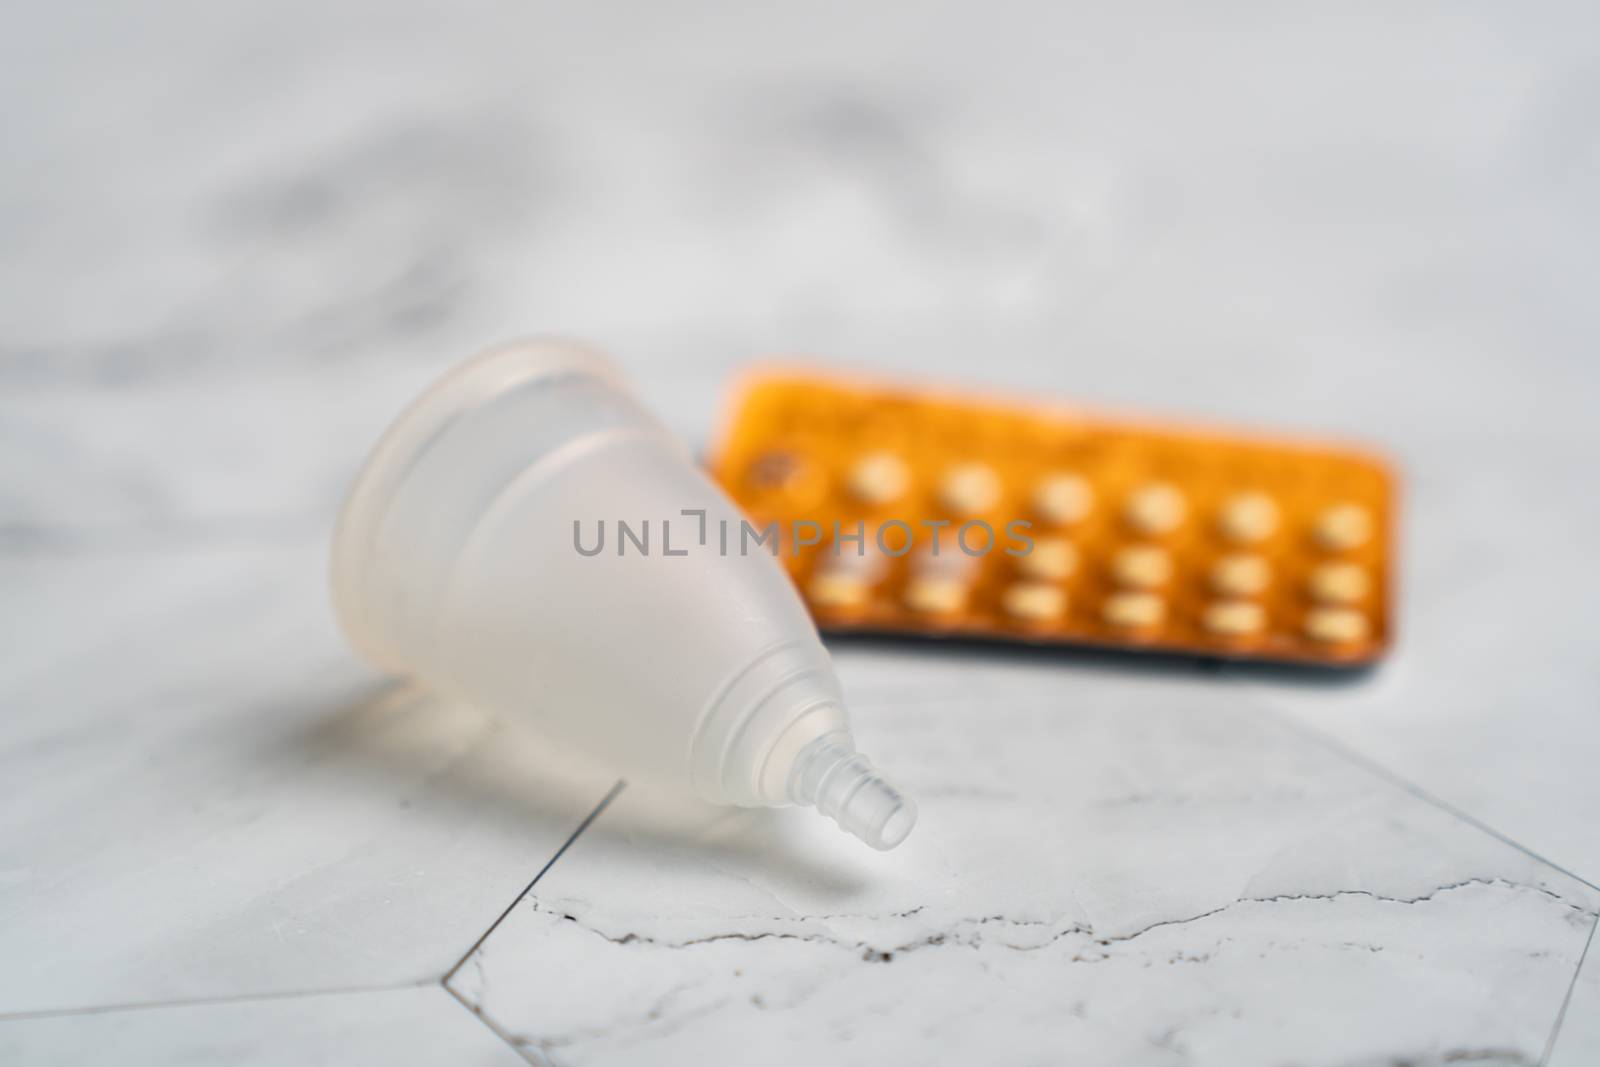 Birth control pill and menstrual cups with on white marble background.